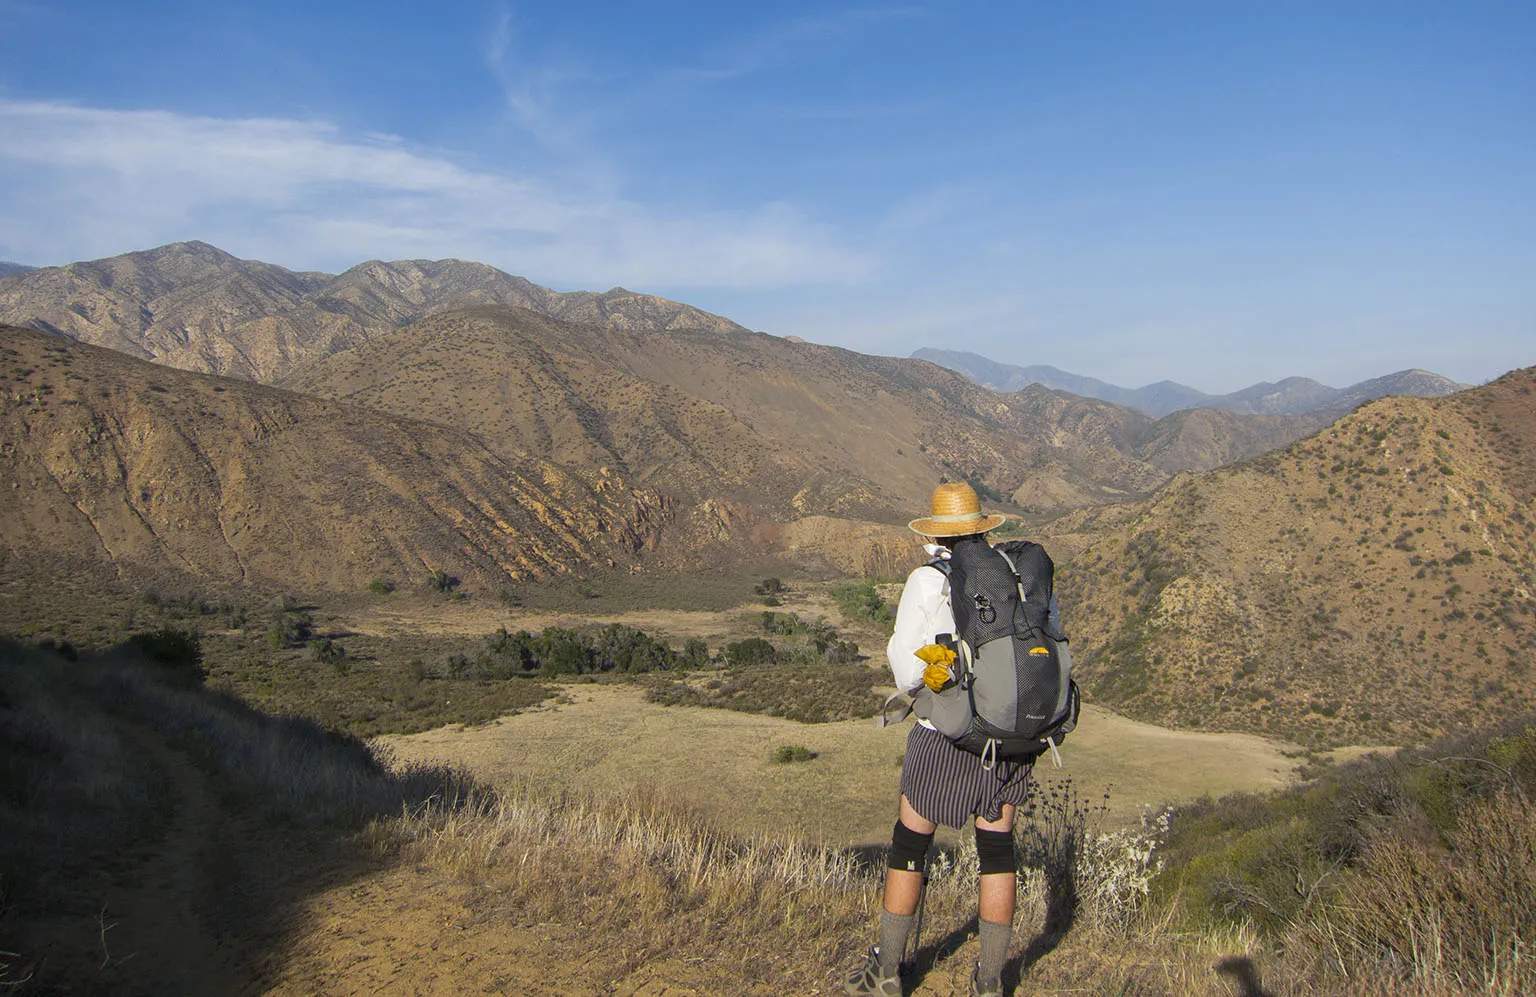 On the trail between Willett and Sespe Hot Springs - looking down at Coltrell Flat